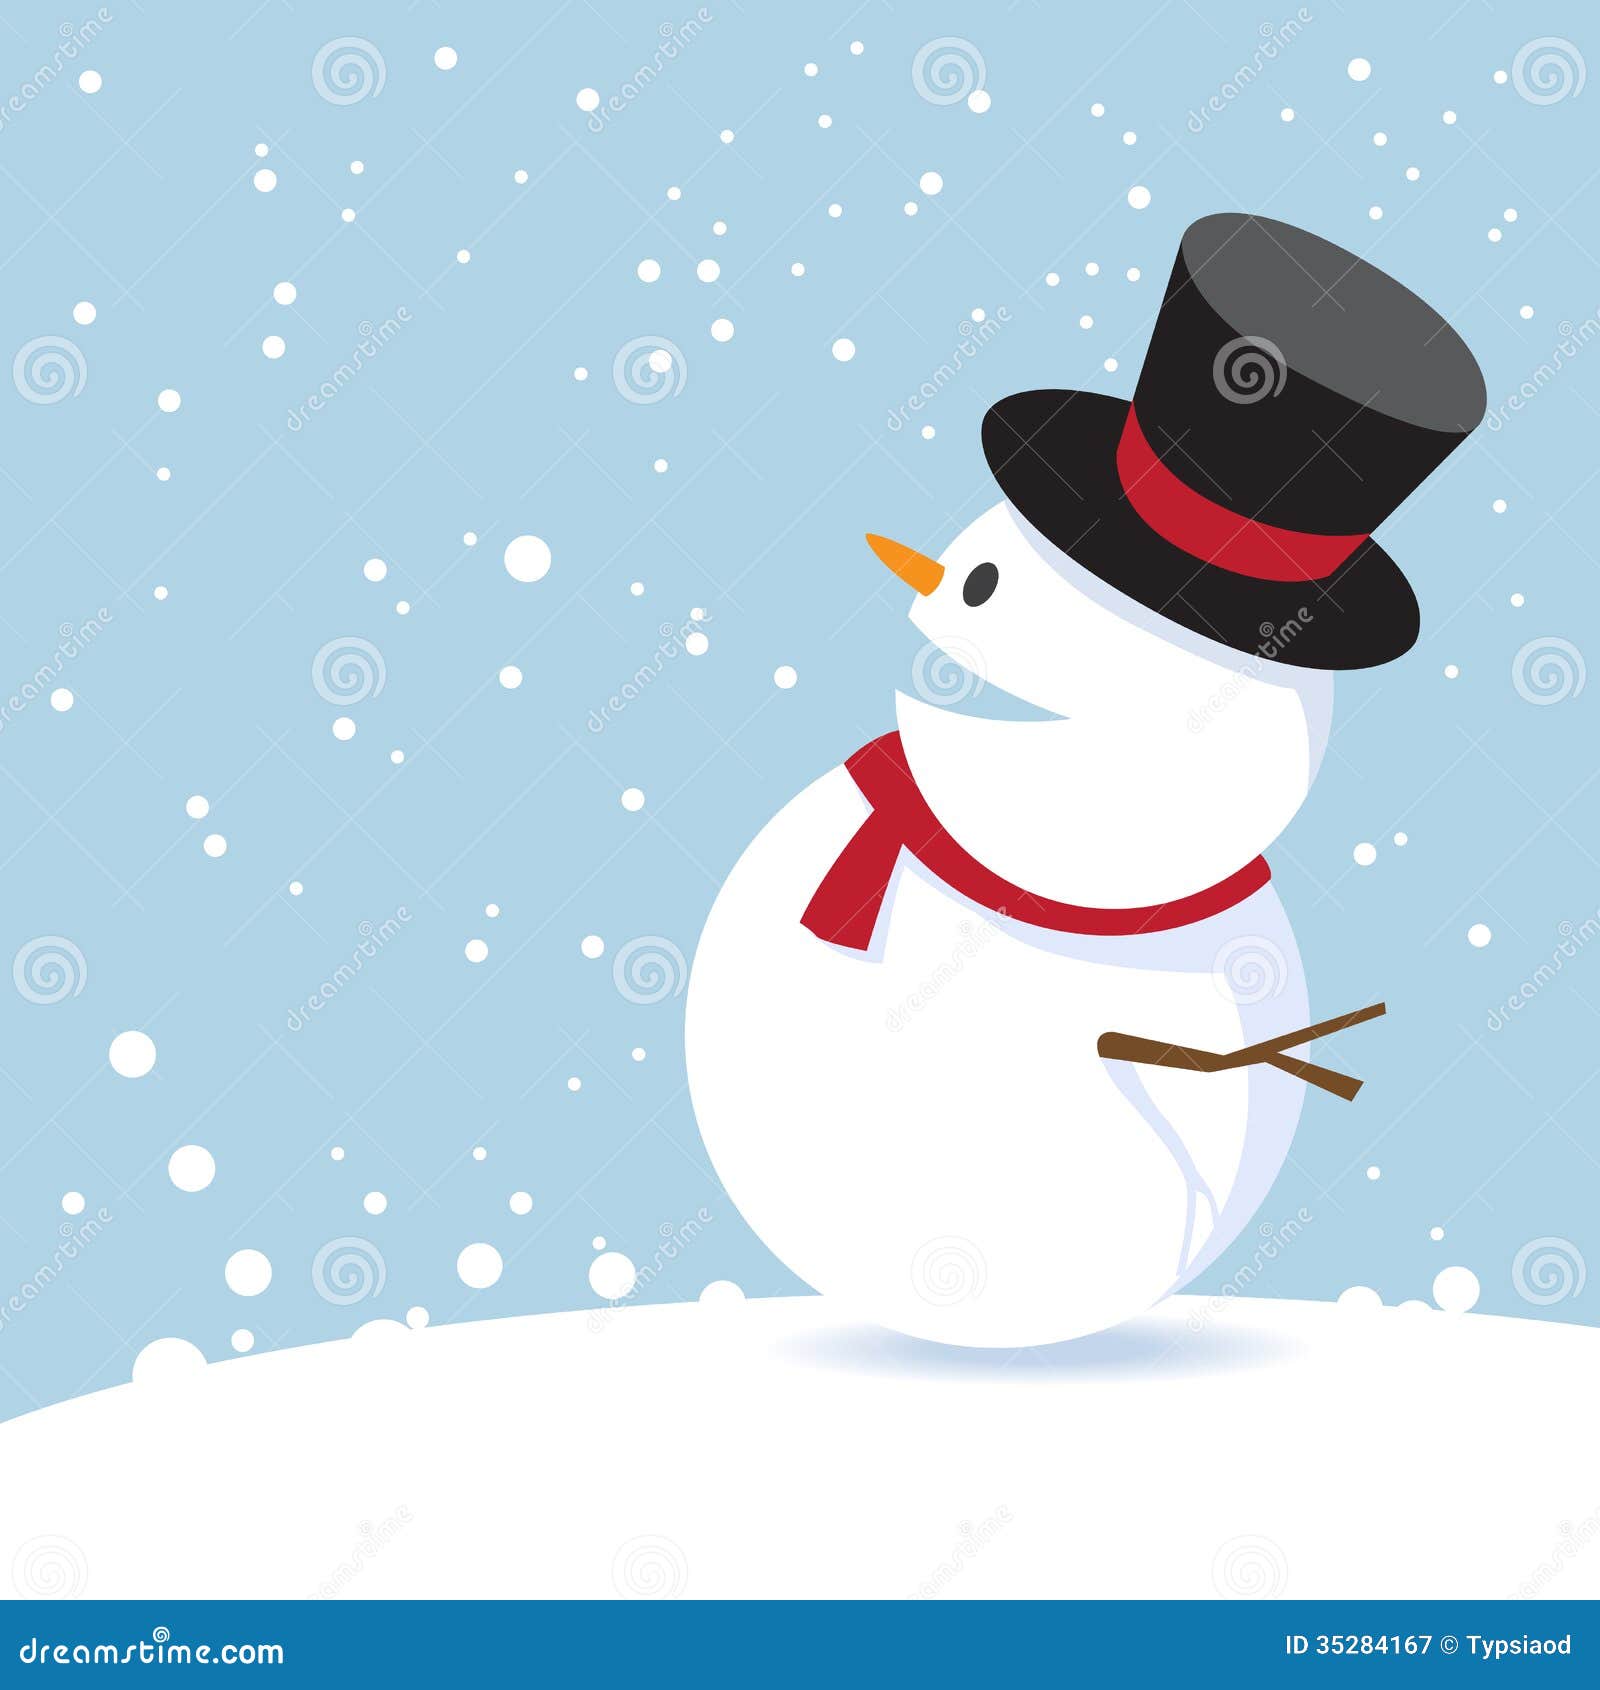 Merry Christmas With Snowman. Stock Vector - Image: 35284167